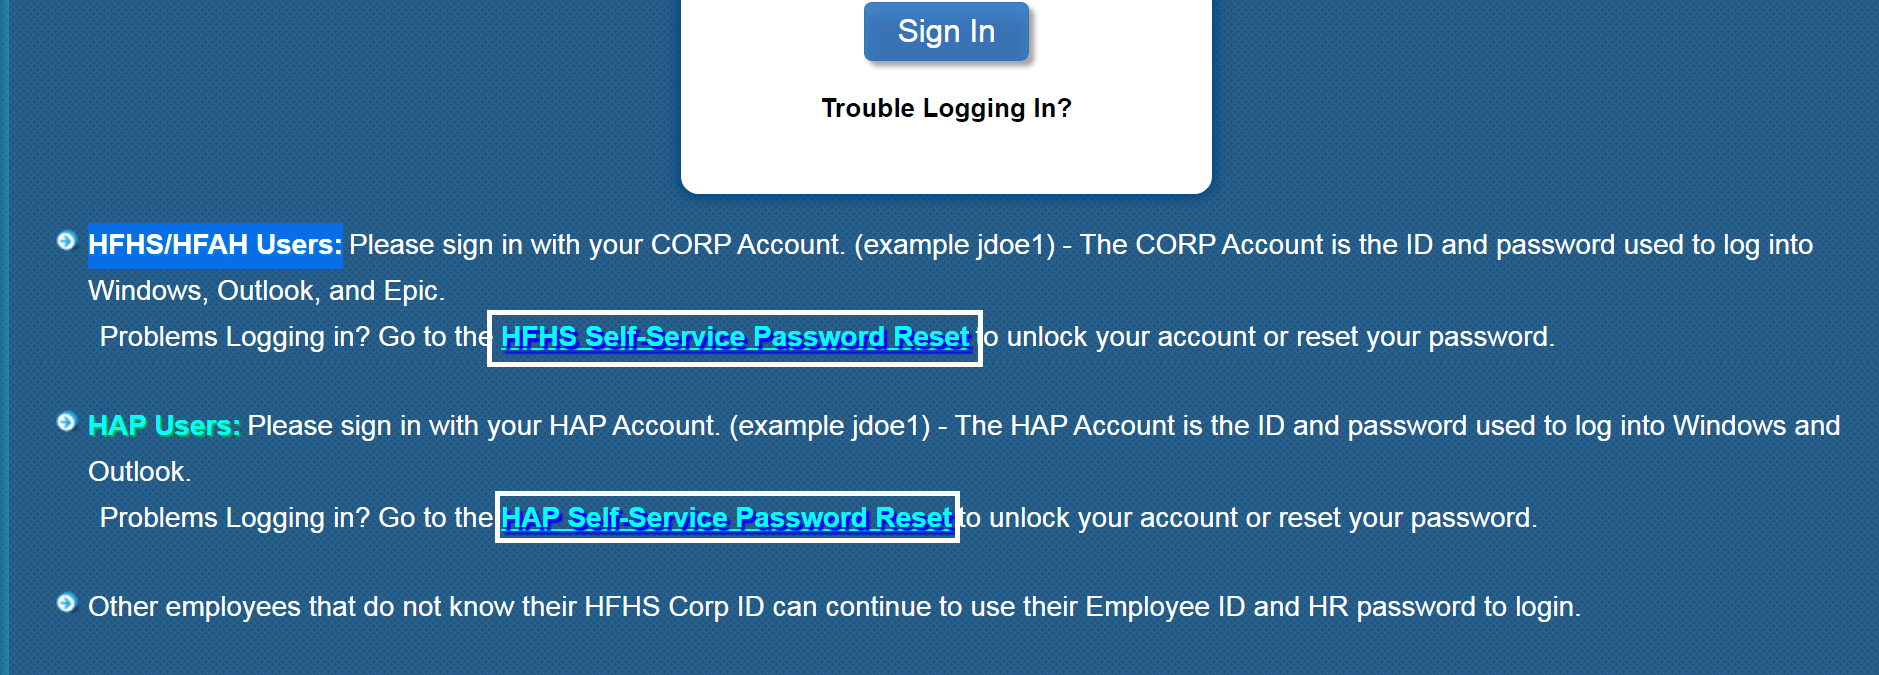 open official website and click on password reset